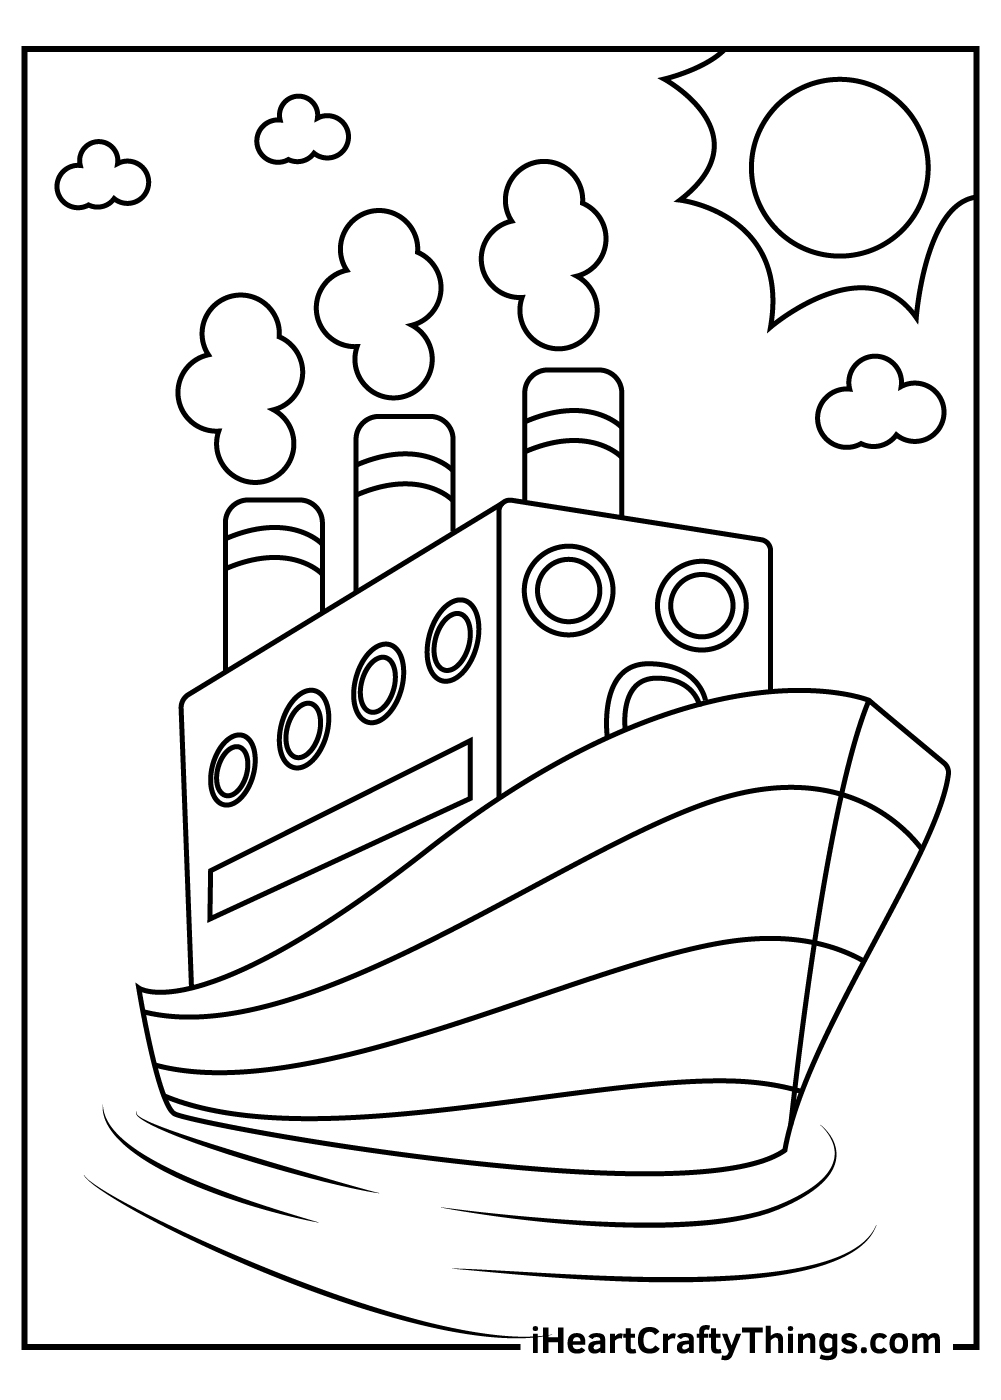 Ships and boats coloring pages updated